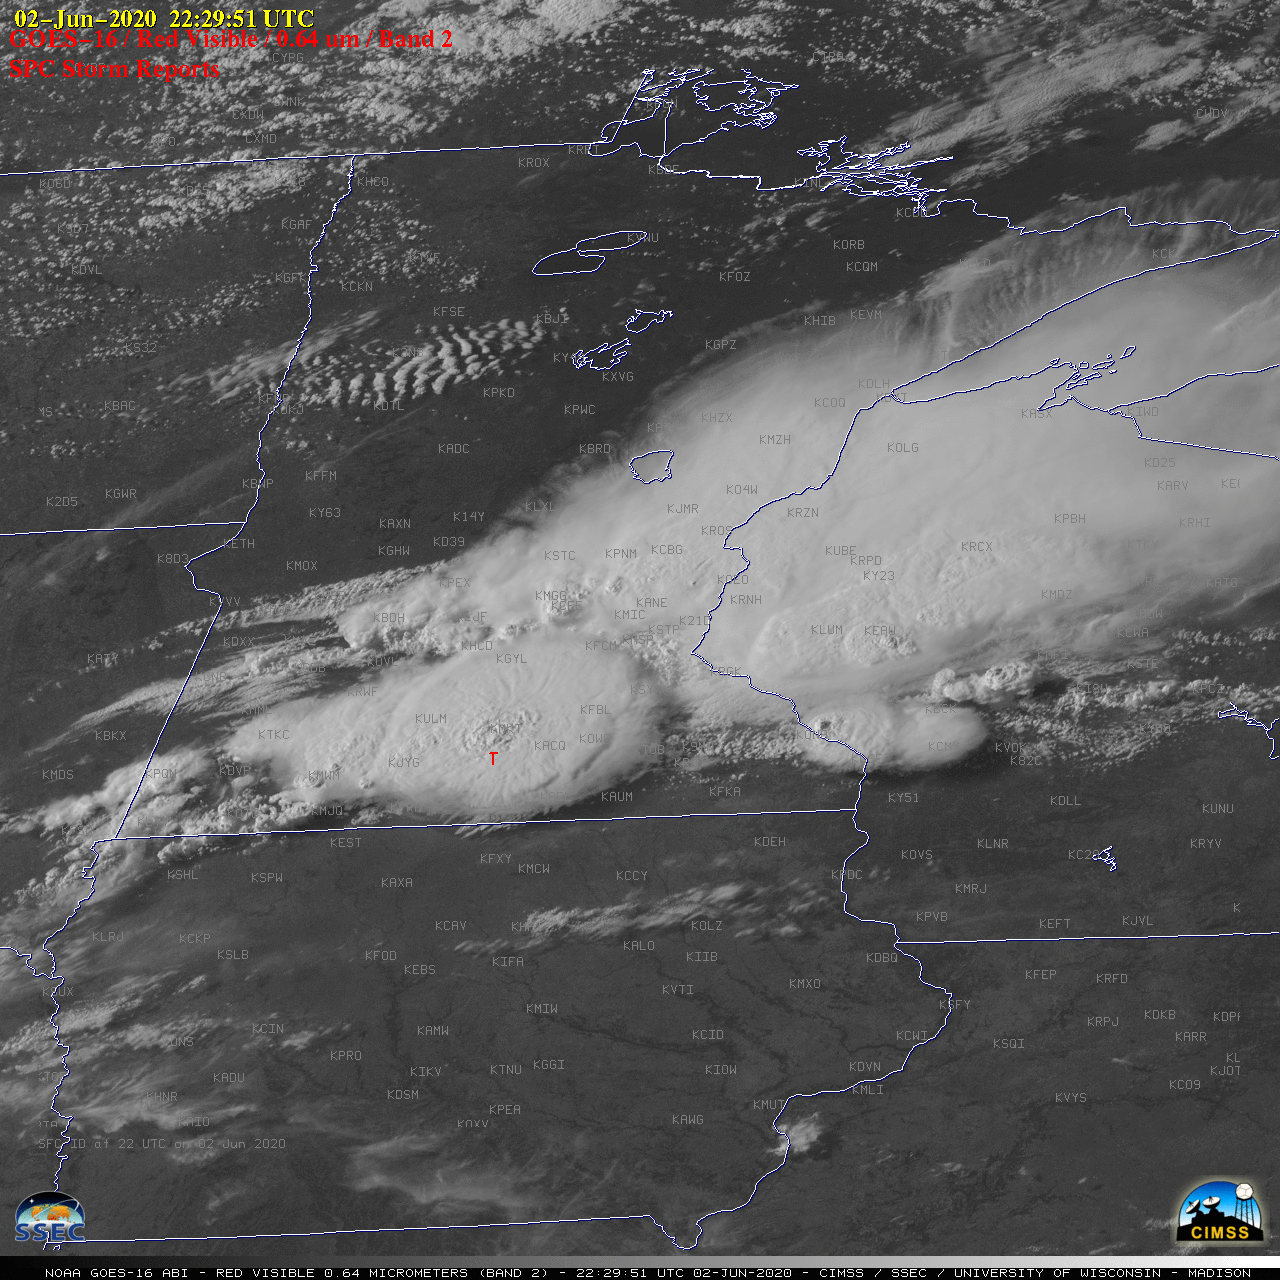 GOES-16 “Red” Visible (0.64 µm) images, with SPC Storm Reports plotted in red [click to play animation | MP4]